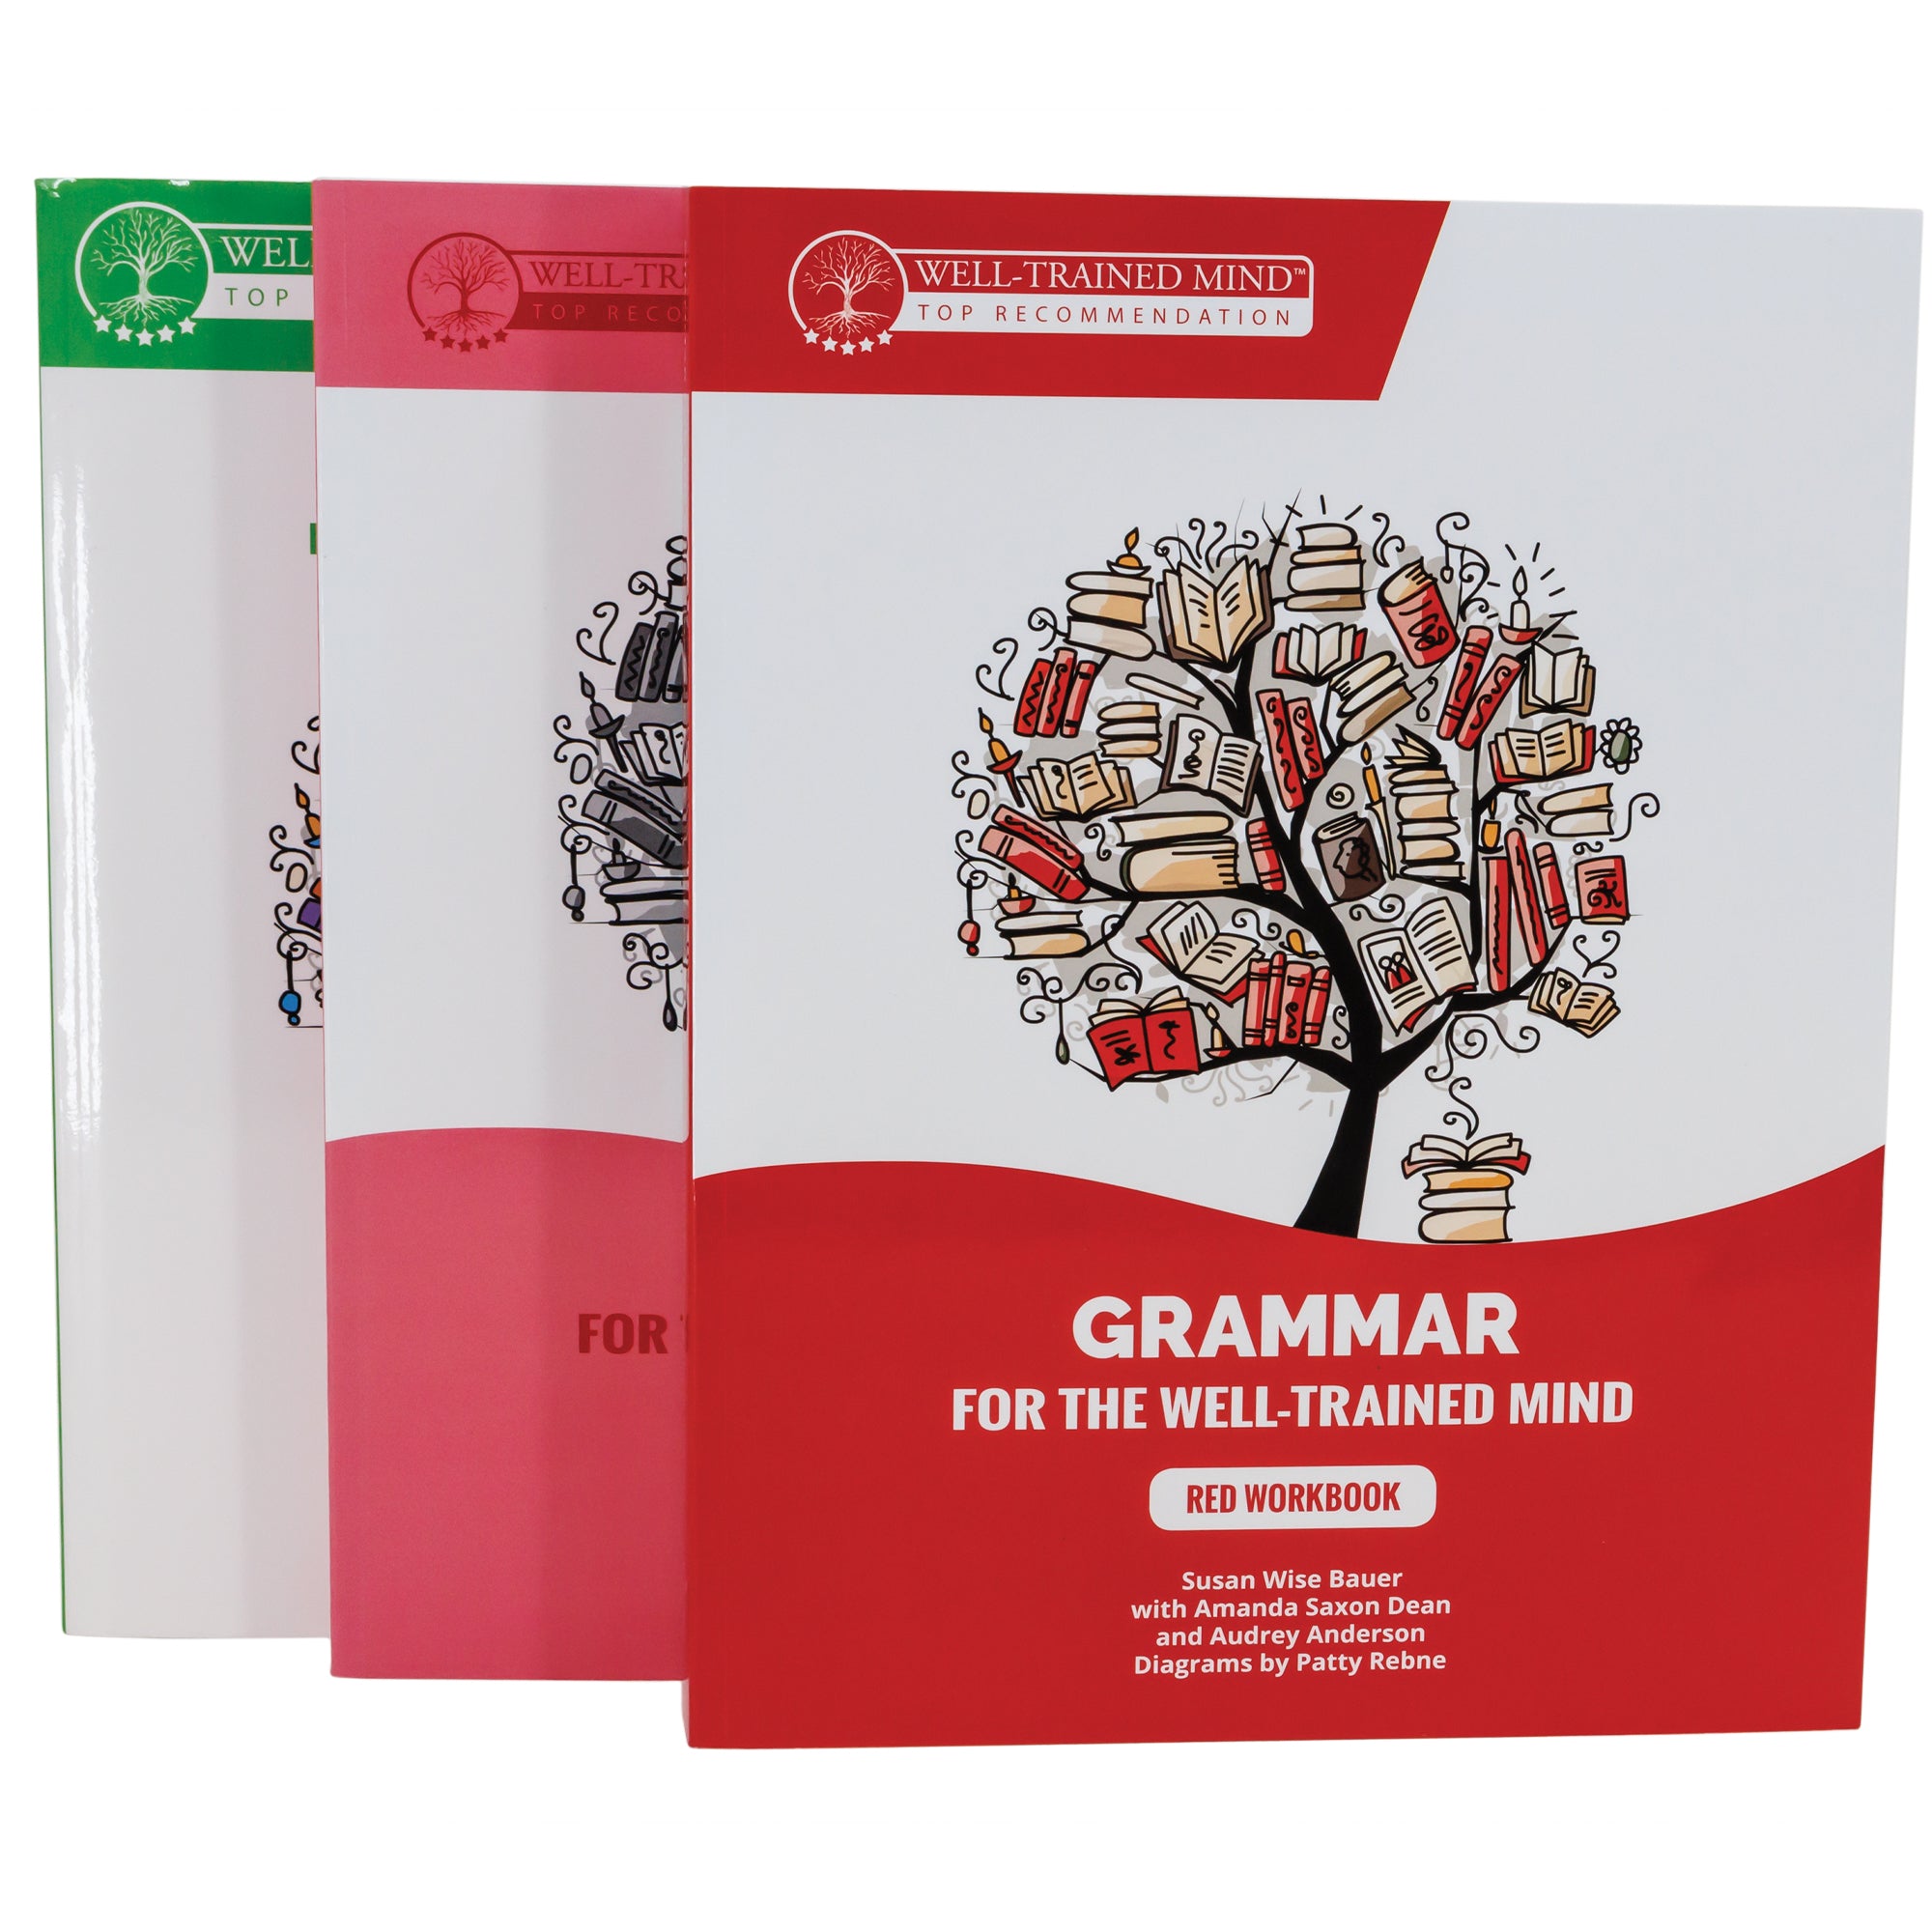 Grammar for the Well-Trained Mind red bundle of 3 books. The front book has a white top and a red bottom with a wave shape between the 2 colors. There is an illustration in the white section of a tree with books for leaves and a stack of books near the trunk. In the red section at the bottom is white text, including the title and “Red Workbook.” Tucked behind the red book is a pink version of this book, then a green version behind the pink.